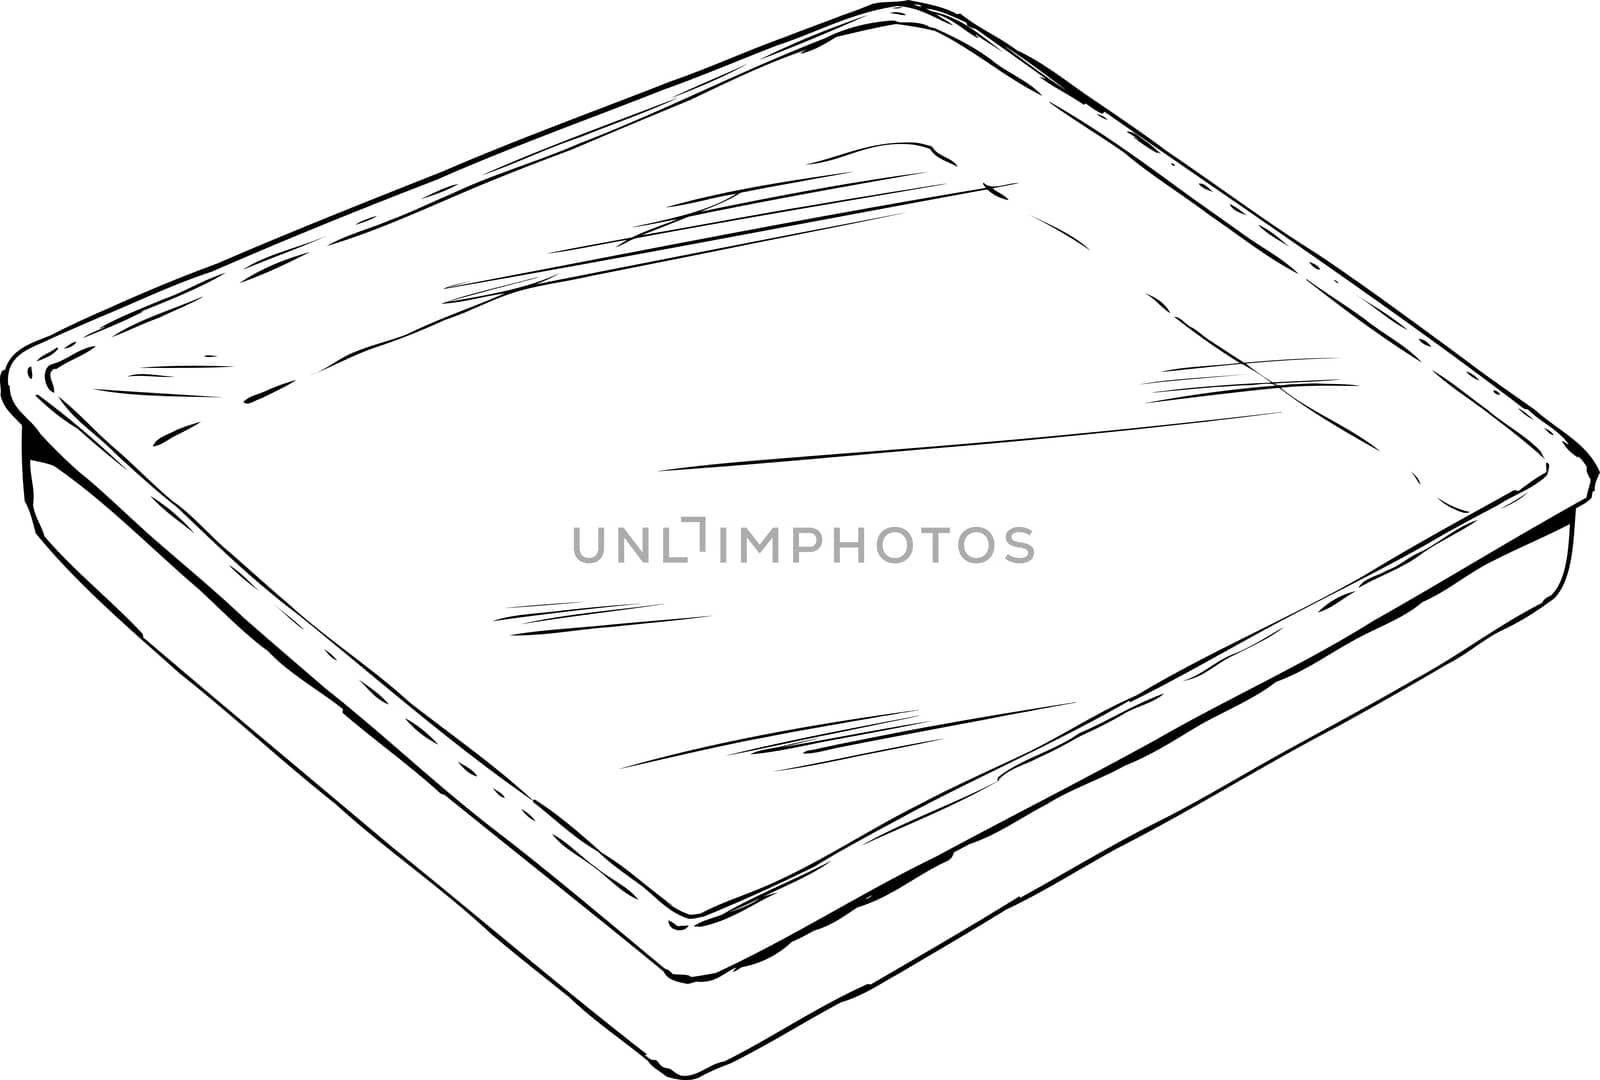 Empty tray with plastic cover outline by TheBlackRhino